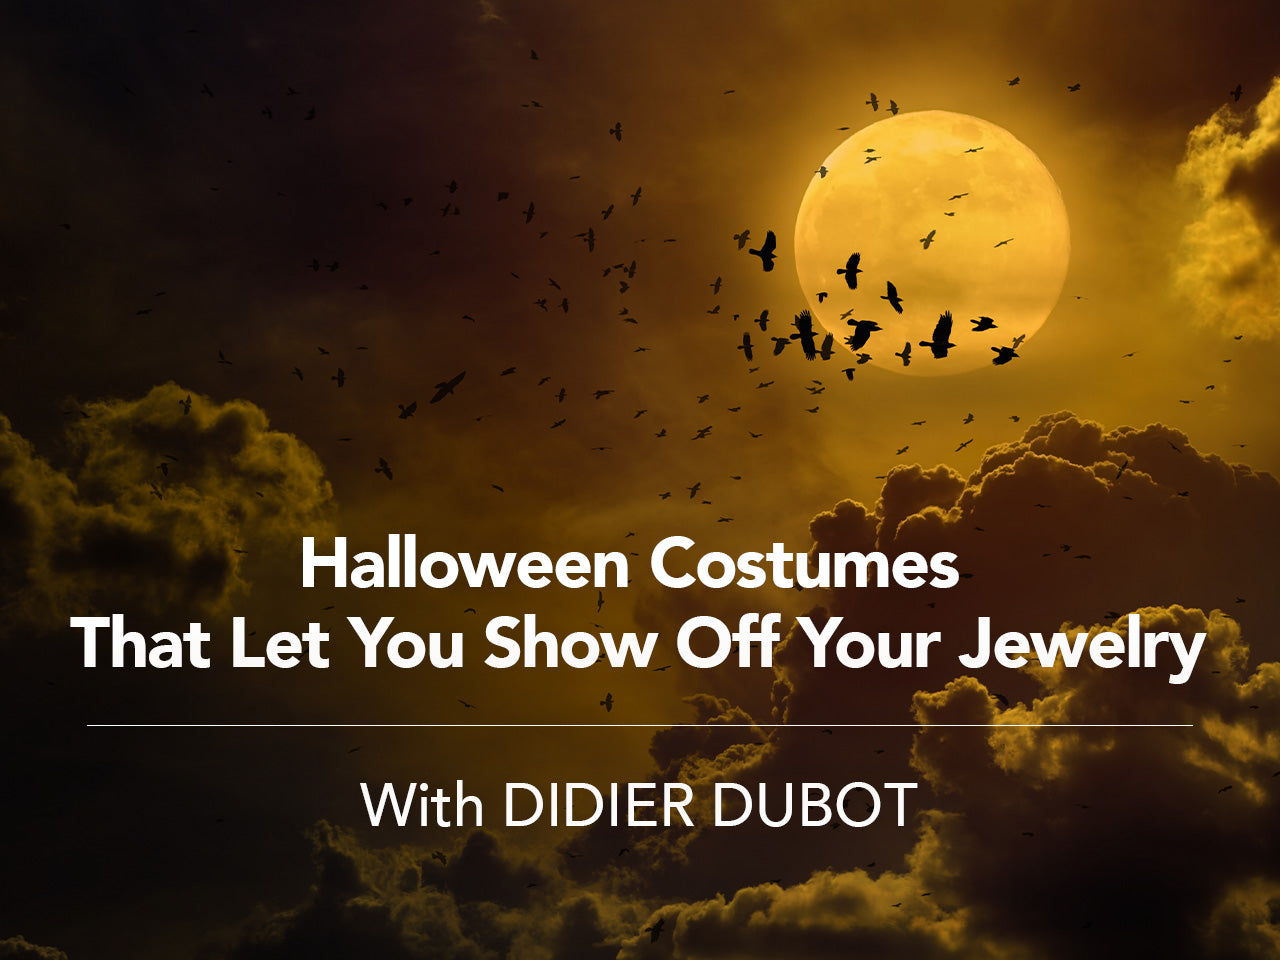 Halloween Costumes That Let You Show Off Your Jewelry